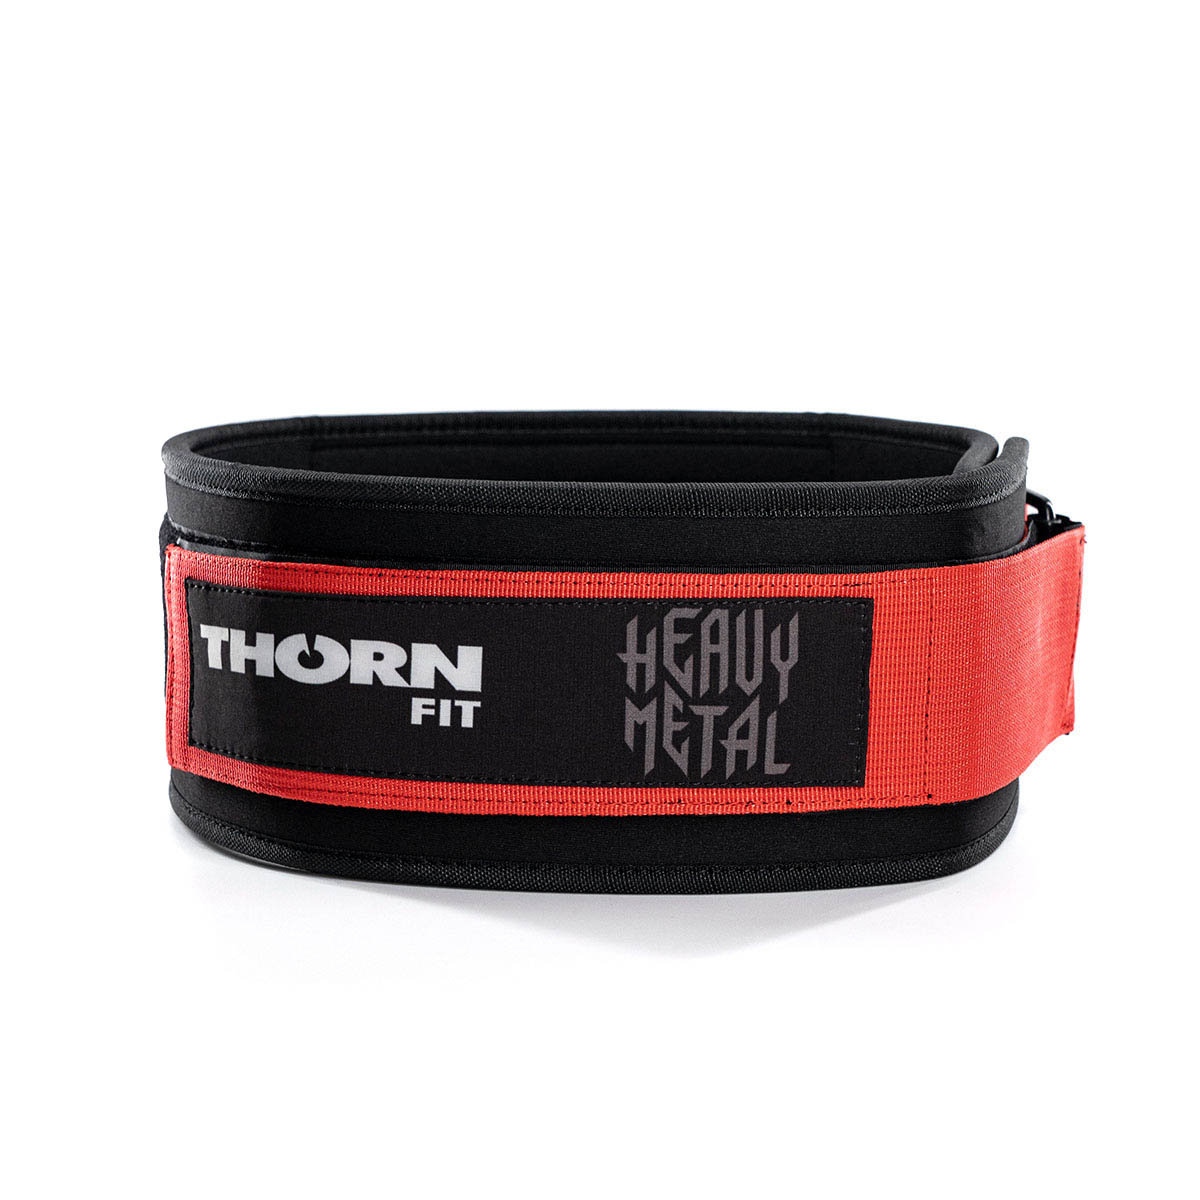 THORN FIT Lifting straps cotton army green – Thorn Fit